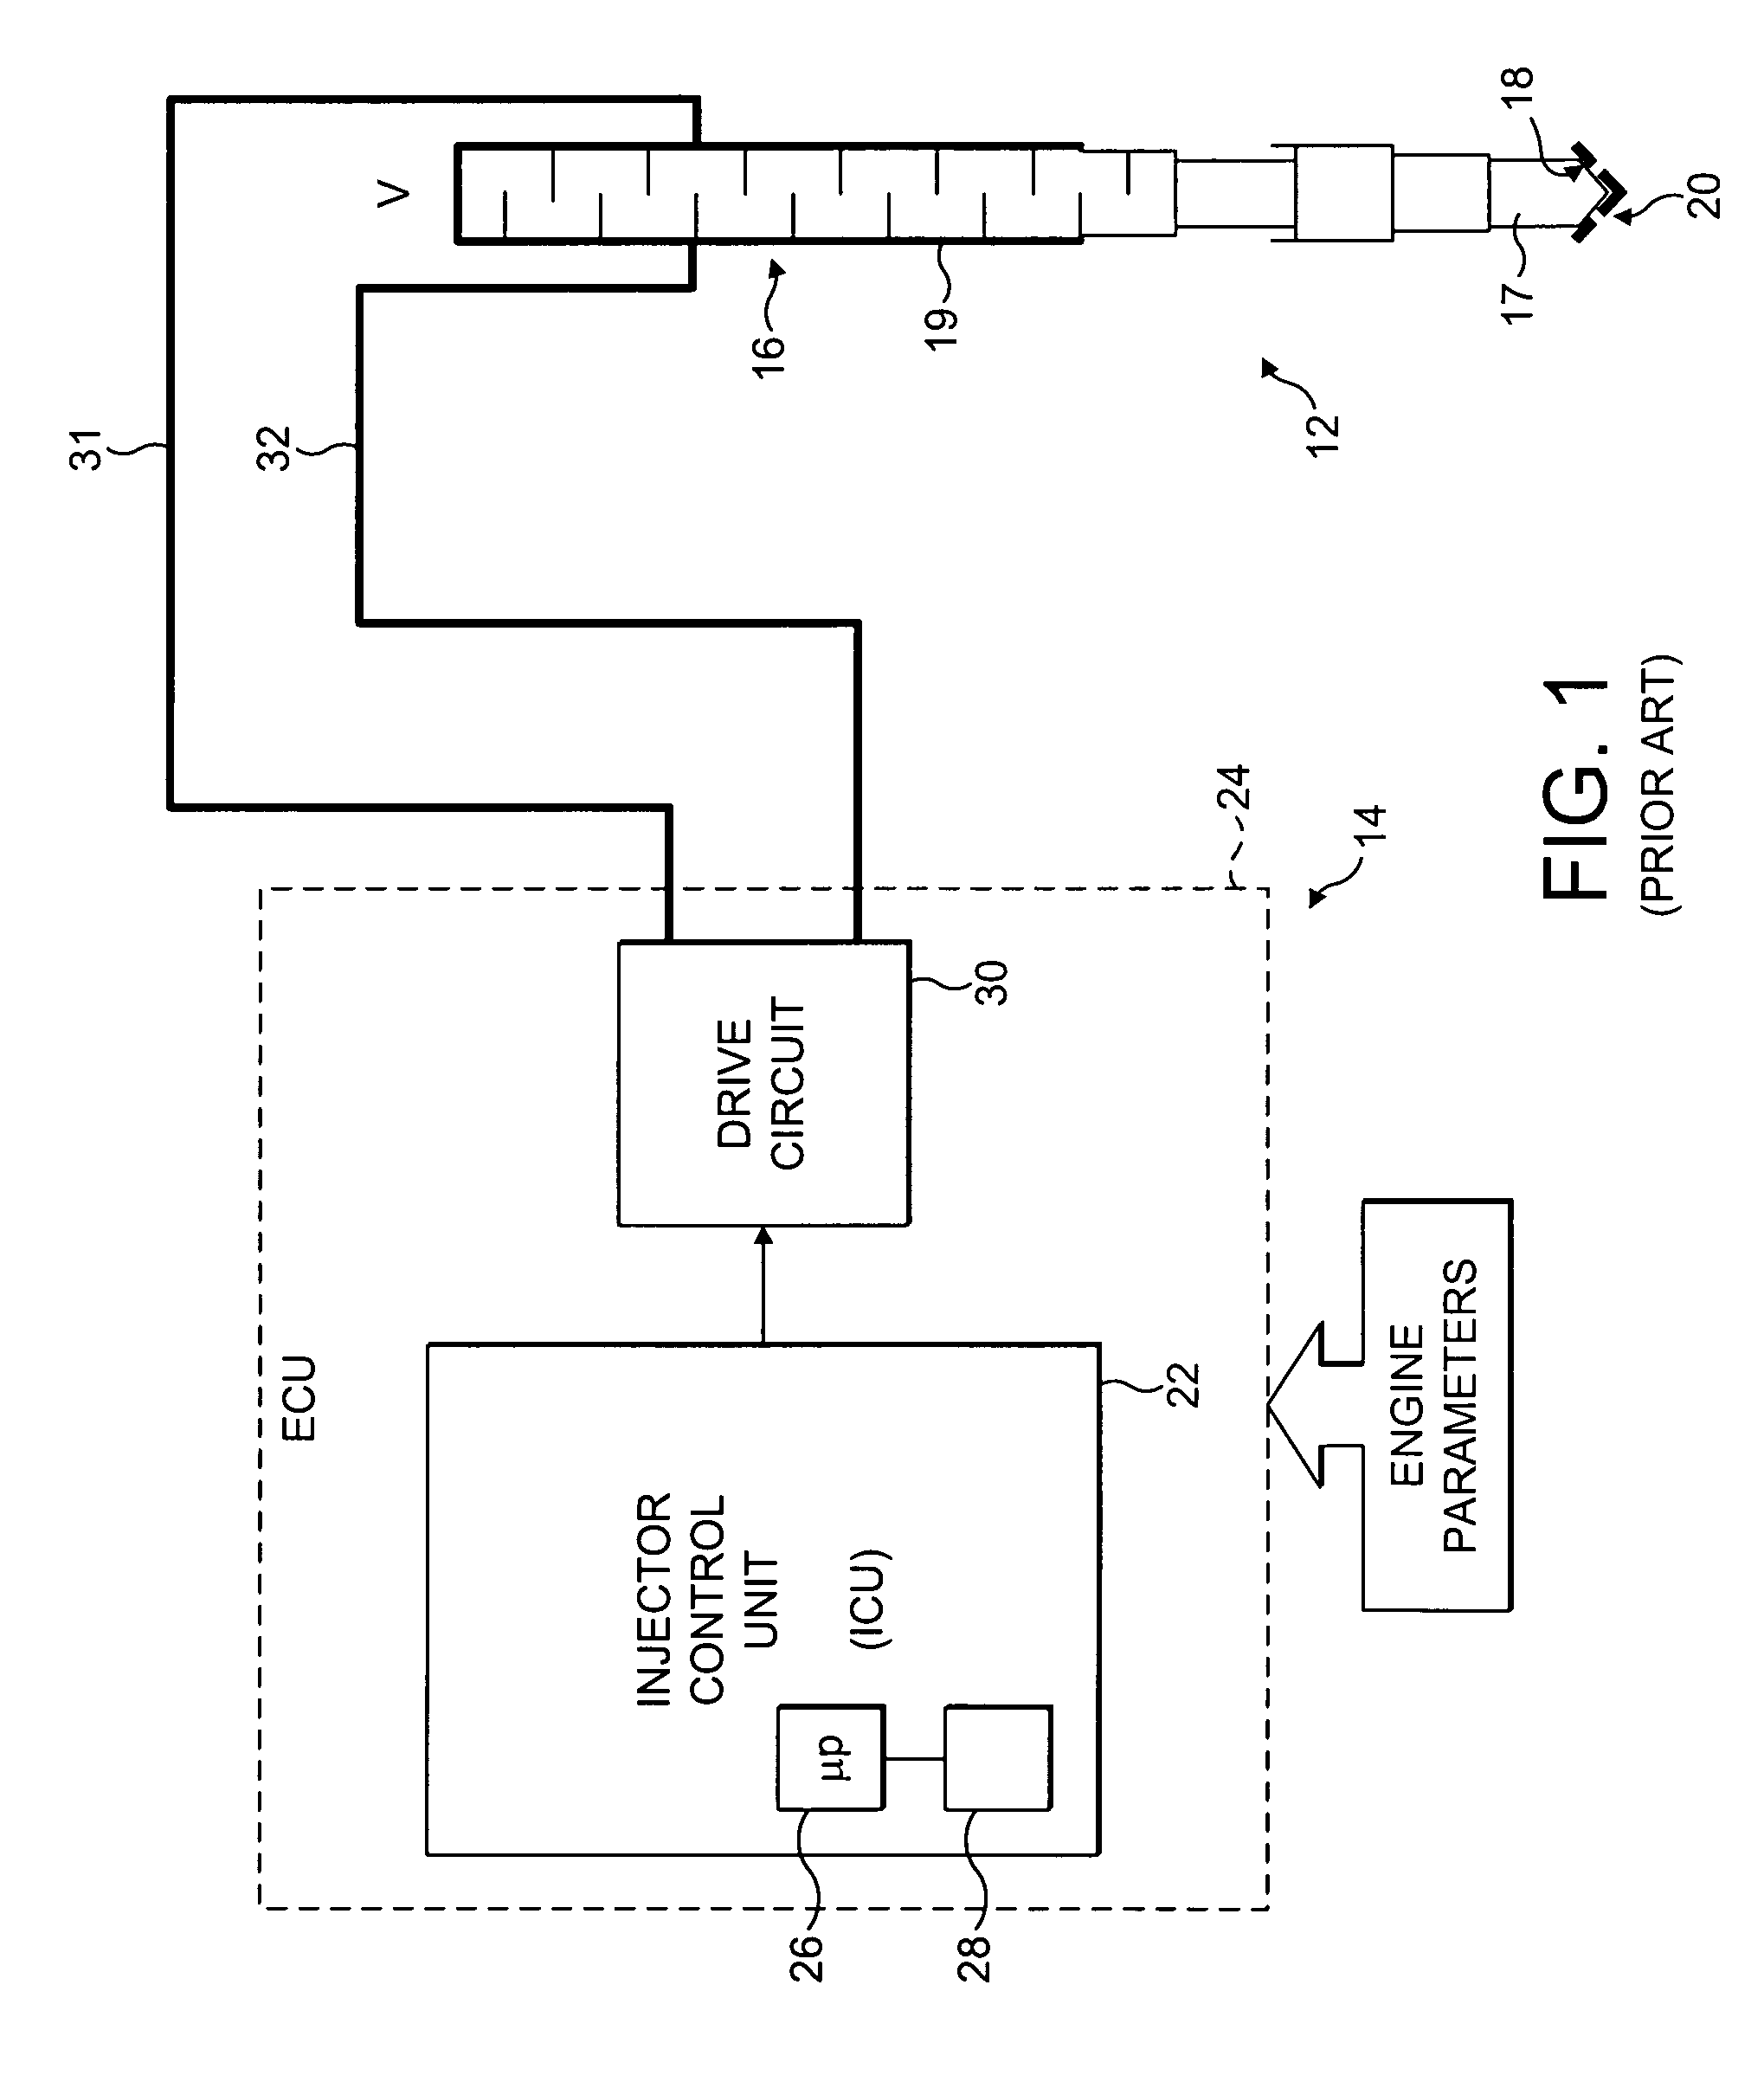 Detection of faults in an injector arrangement